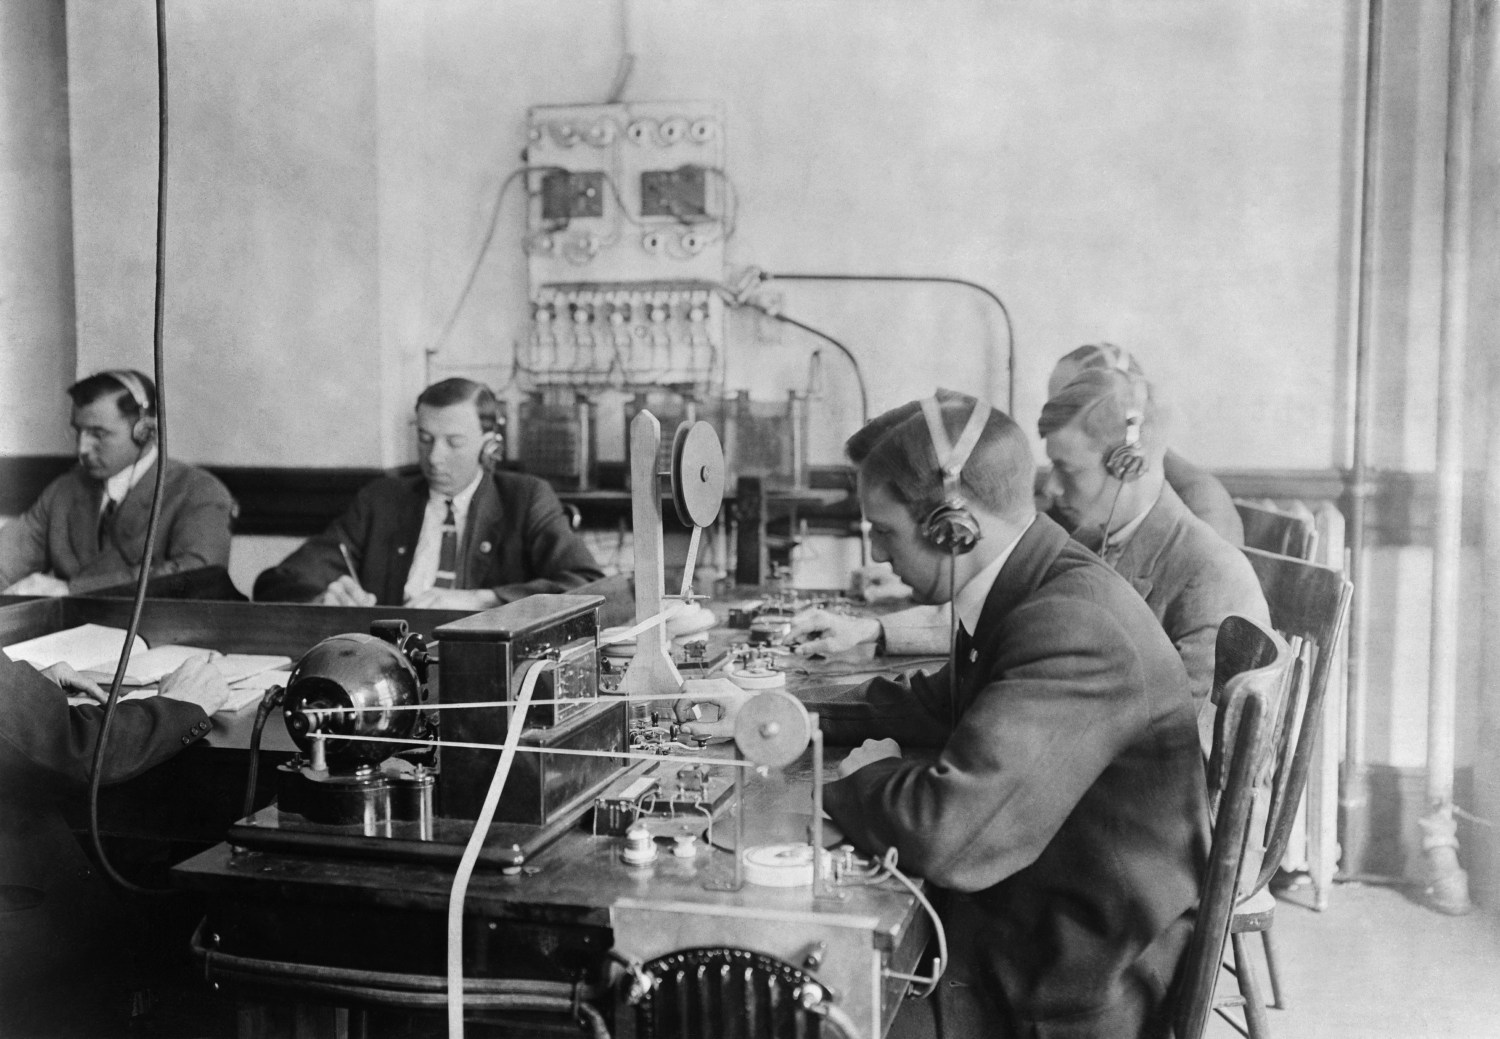 Students practicing telegraphy at the Marconi wireless school in New York City. Ca. 1912.